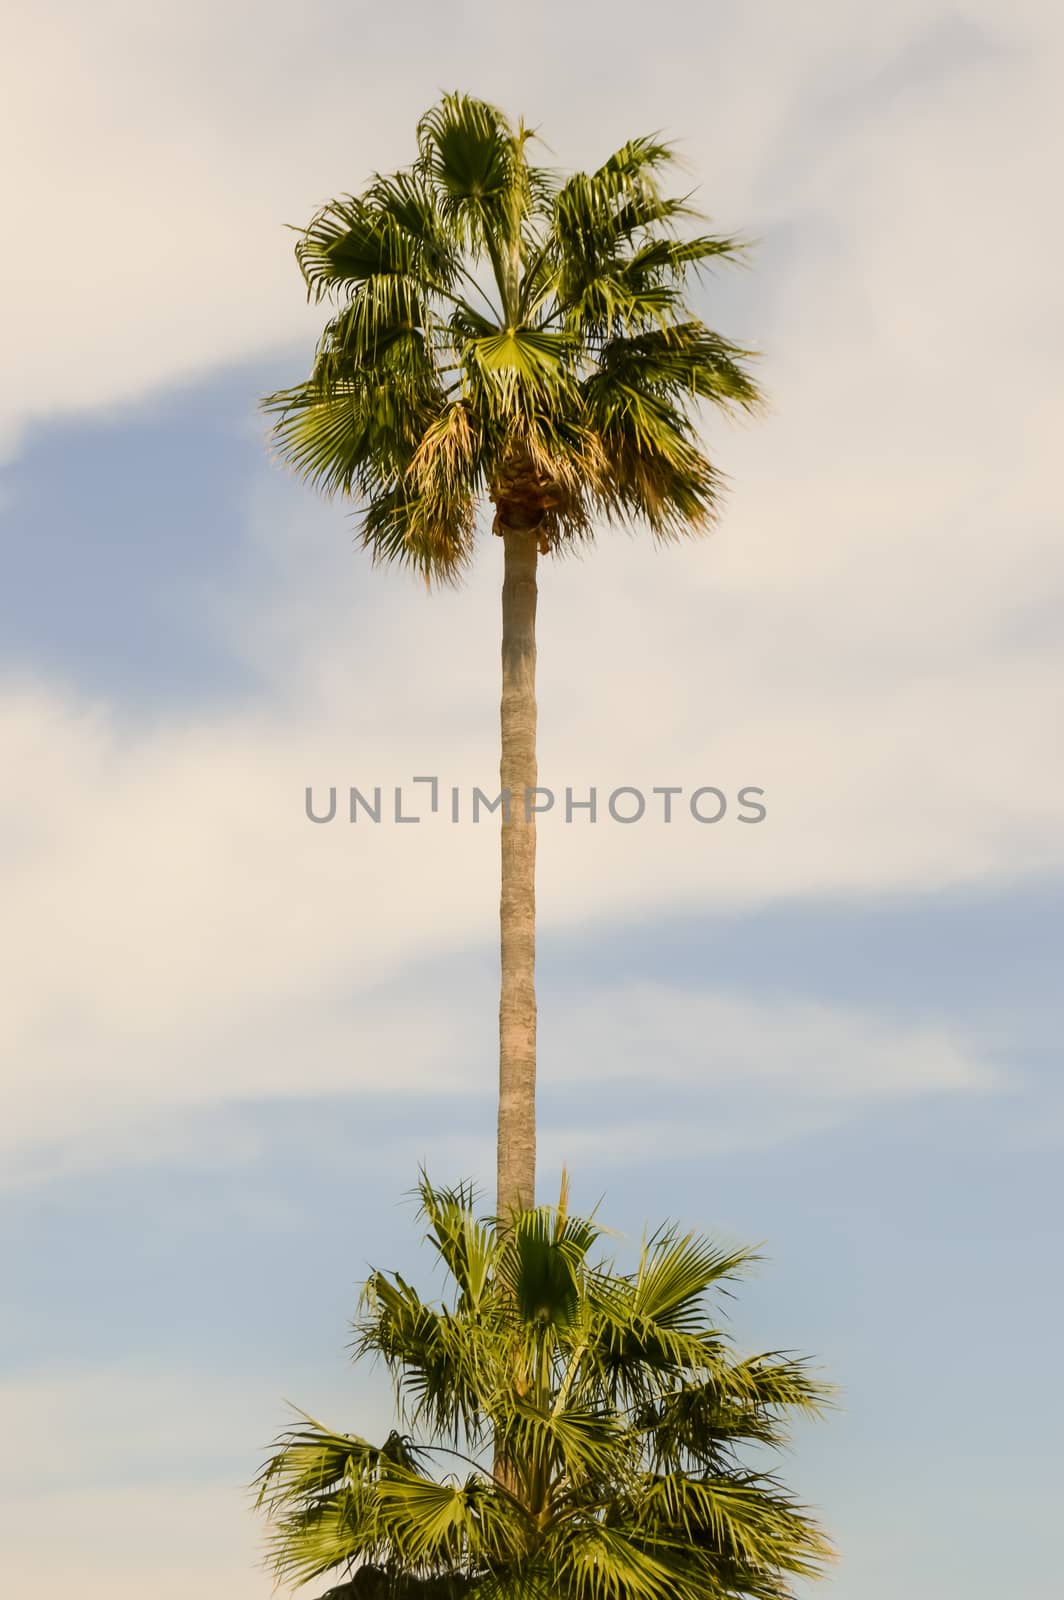 Isolated palm tree in a garden  by Philou1000